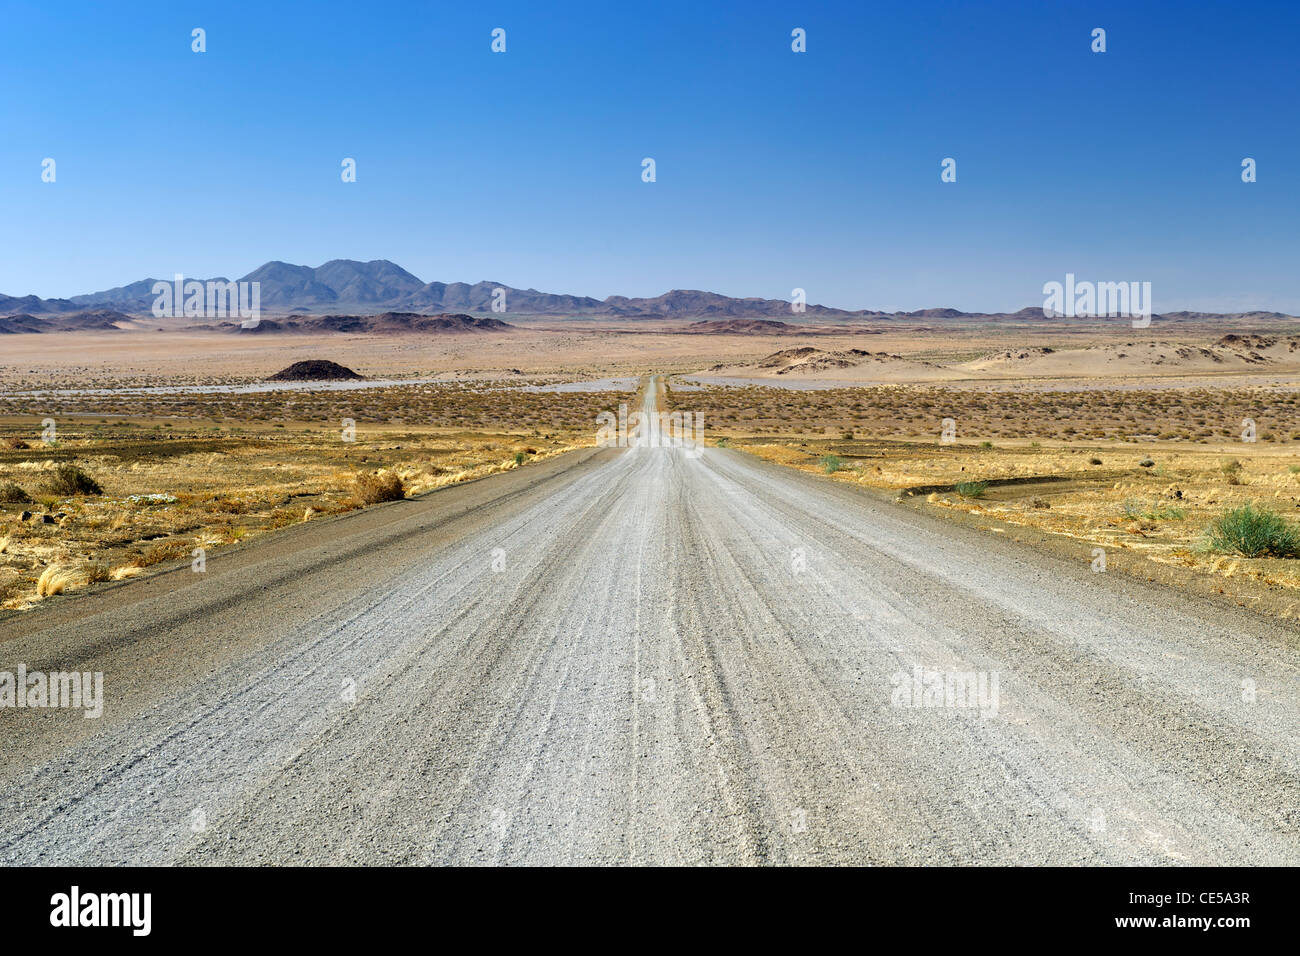 Gravel road in the Karas region of southern Namibia. Stock Photo